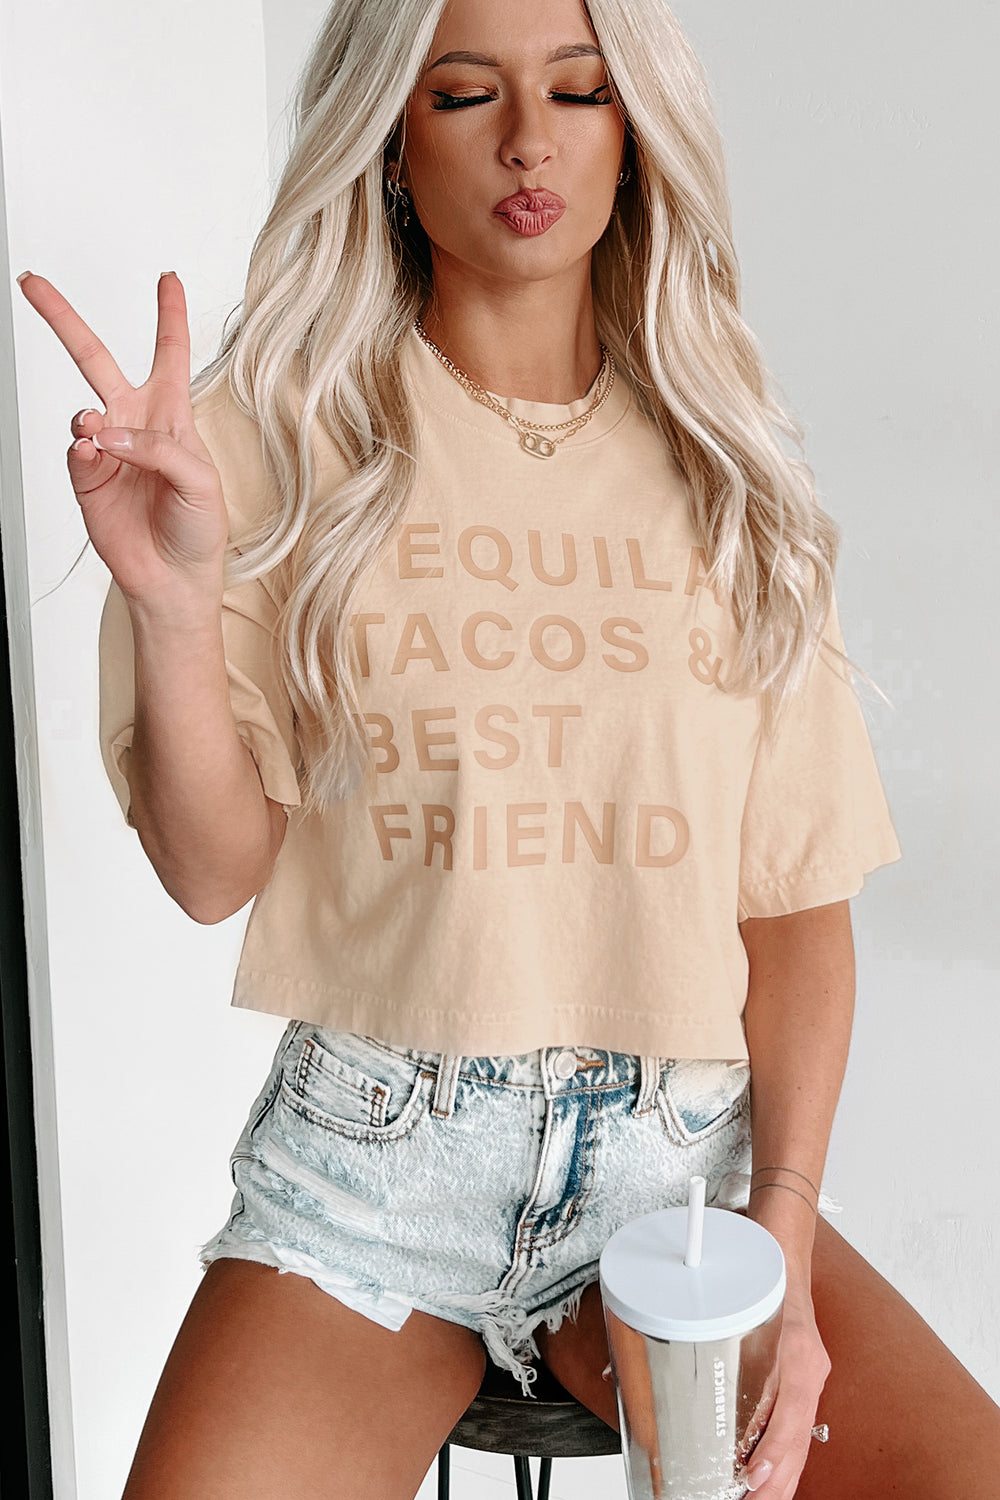 "Tequila, Tacos & Best Friends" Boxy Fit Graphic Crop Tee (Beige) - Print On Demand - NanaMacs